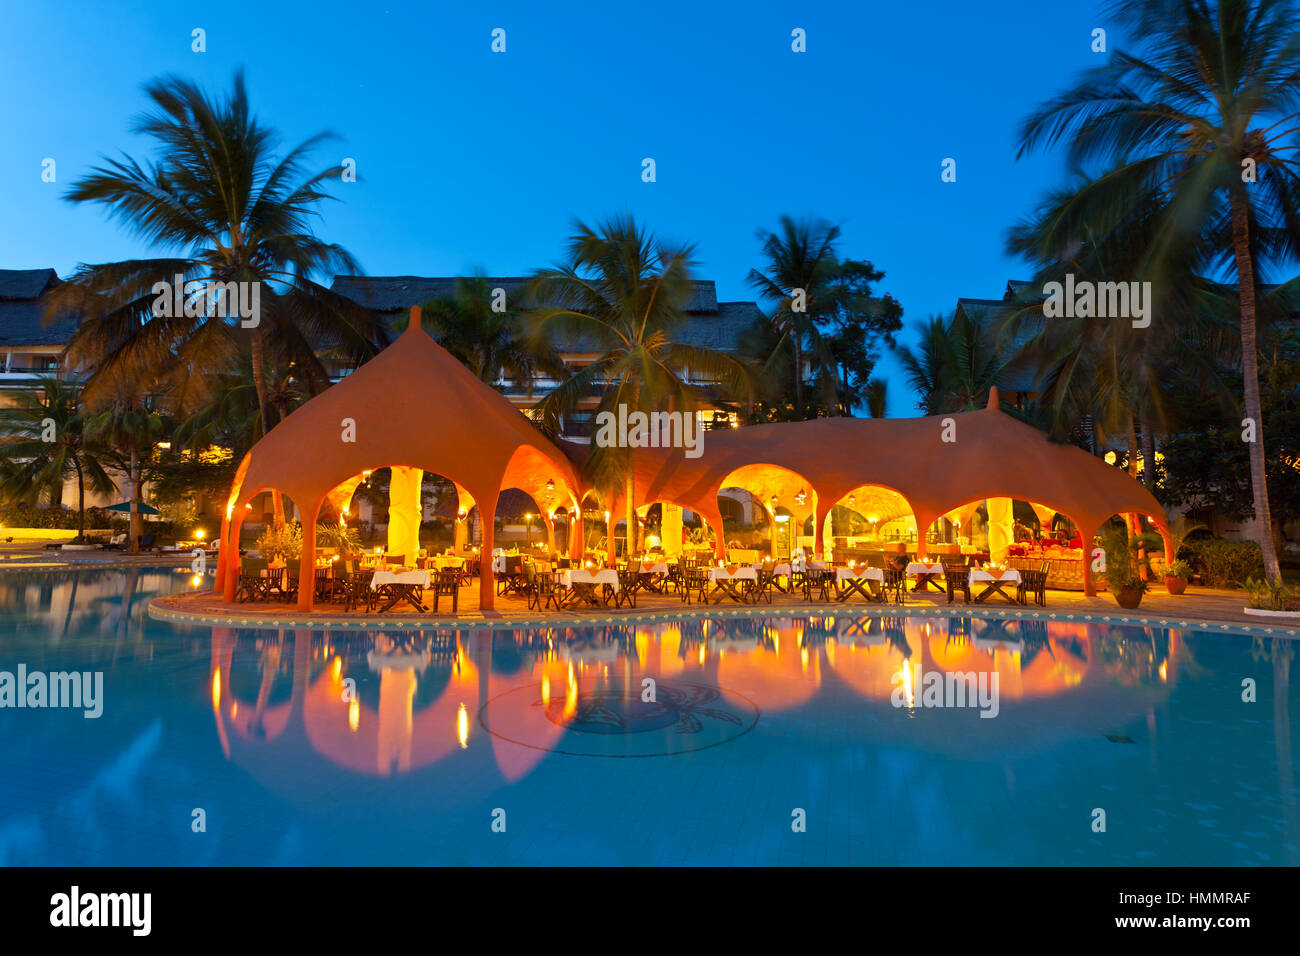 Diani Beach, Kenya - February 17: Restaurant and illuminated pool landscape in the Southern Palms Beach Resort at night on February 17, 2013 Stock Photo